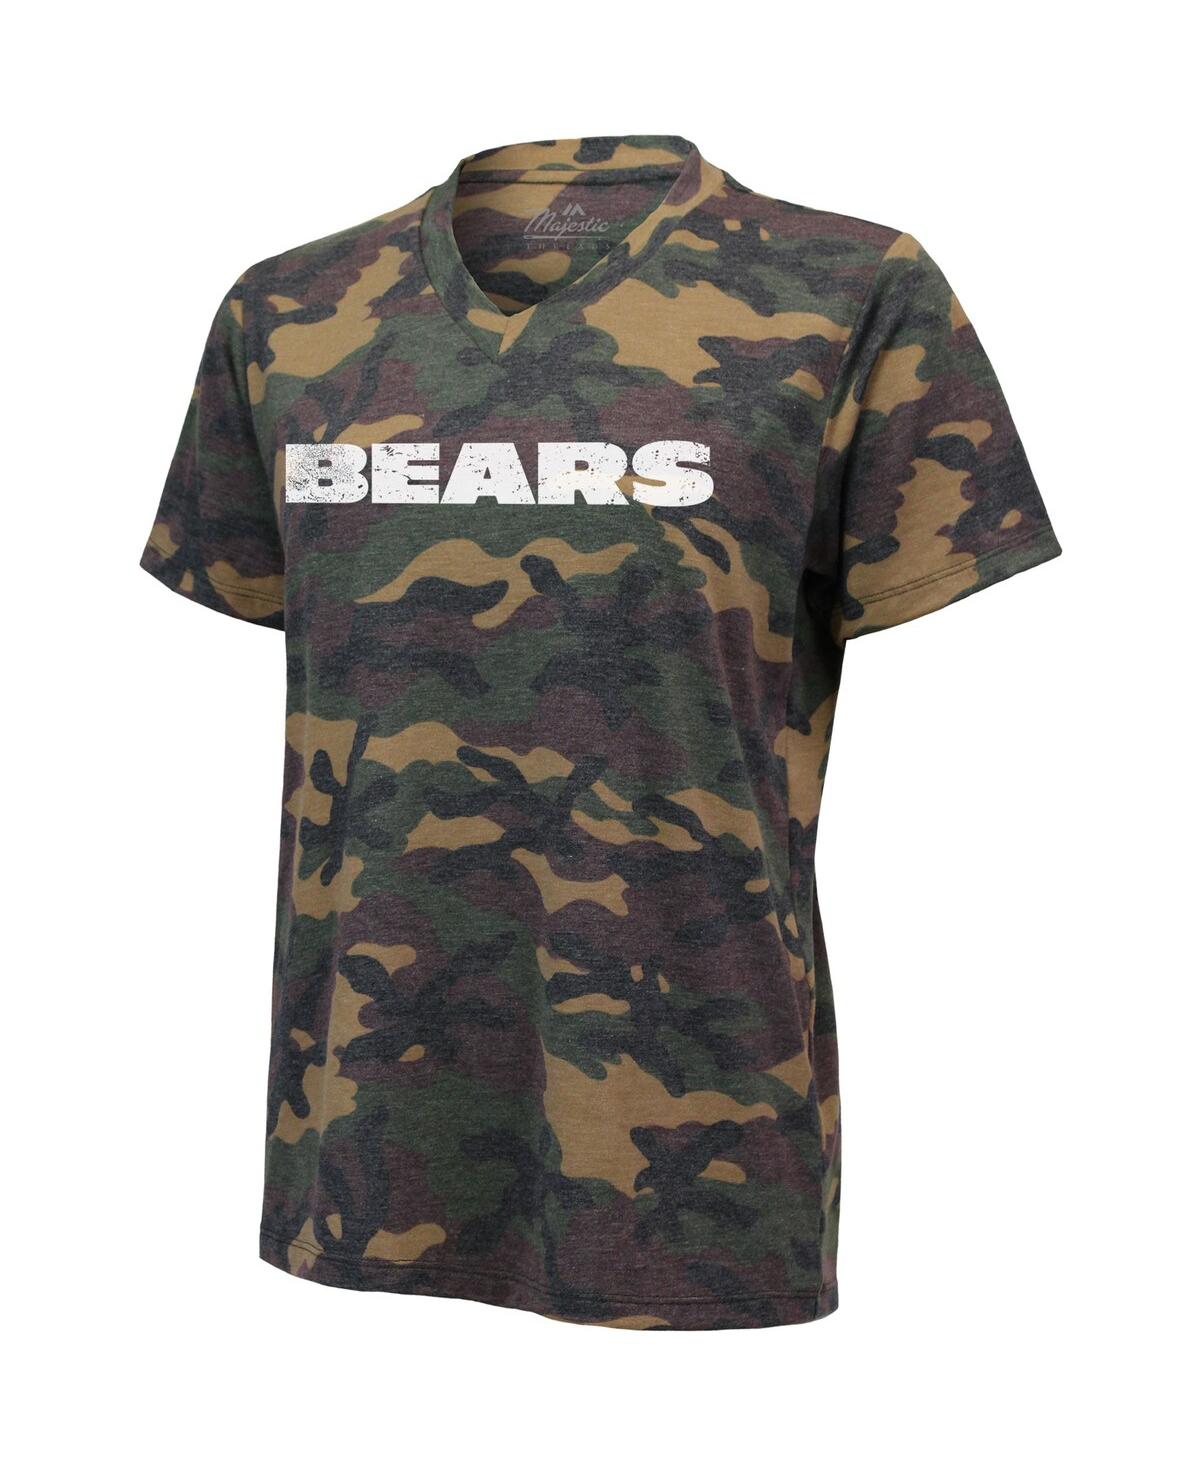 Shop Industry Rag Women's Justin Fields Camo Chicago Bears Name And Number V-neck T-shirt